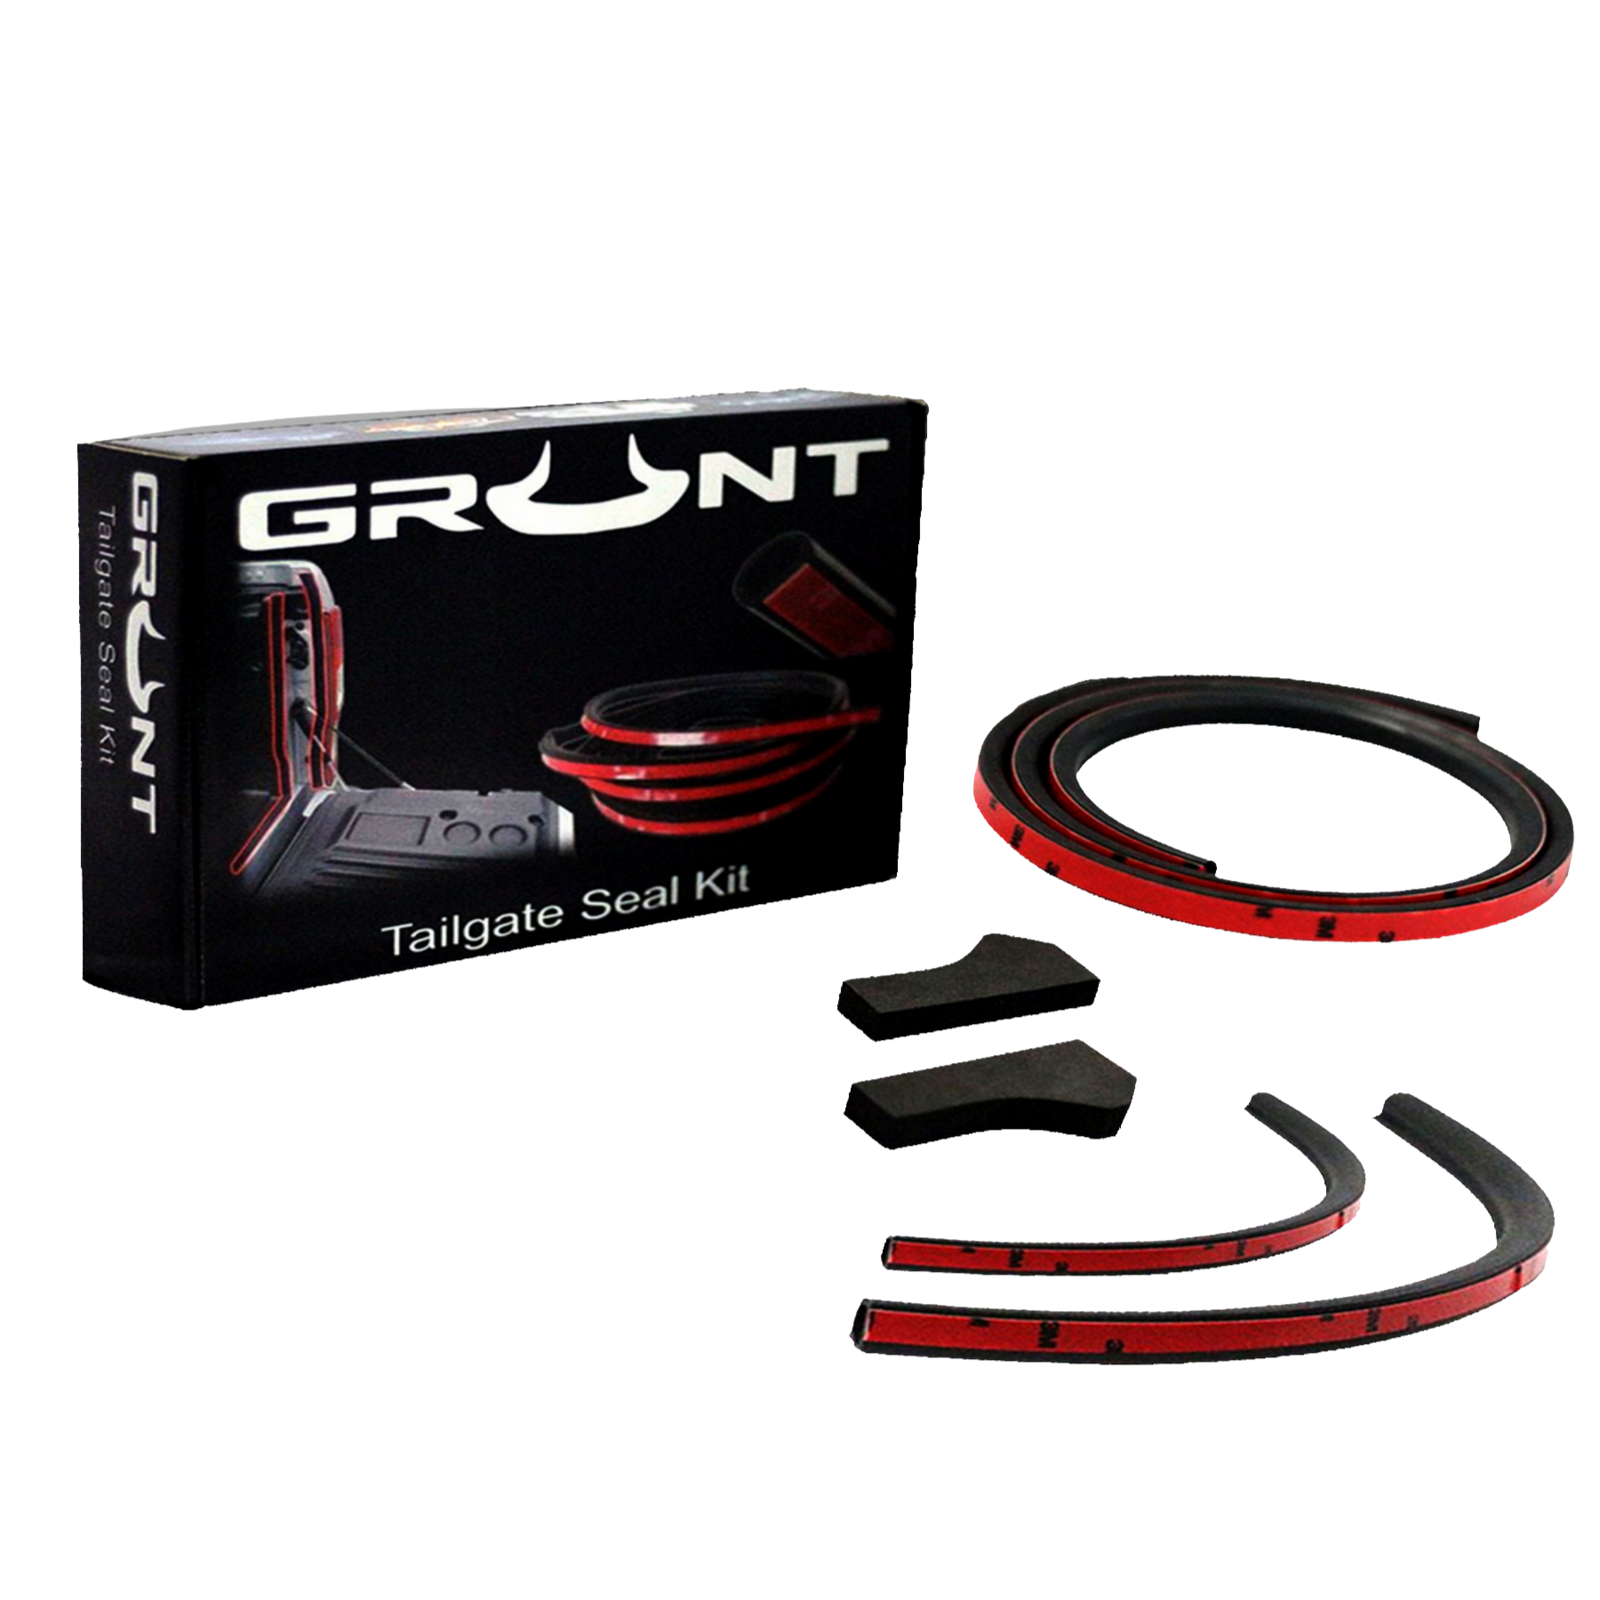 Grunt 4x4 tailgate seal kit for Toyota Hilux SR (Twin Handle) 2015-2019 GTG-TH15